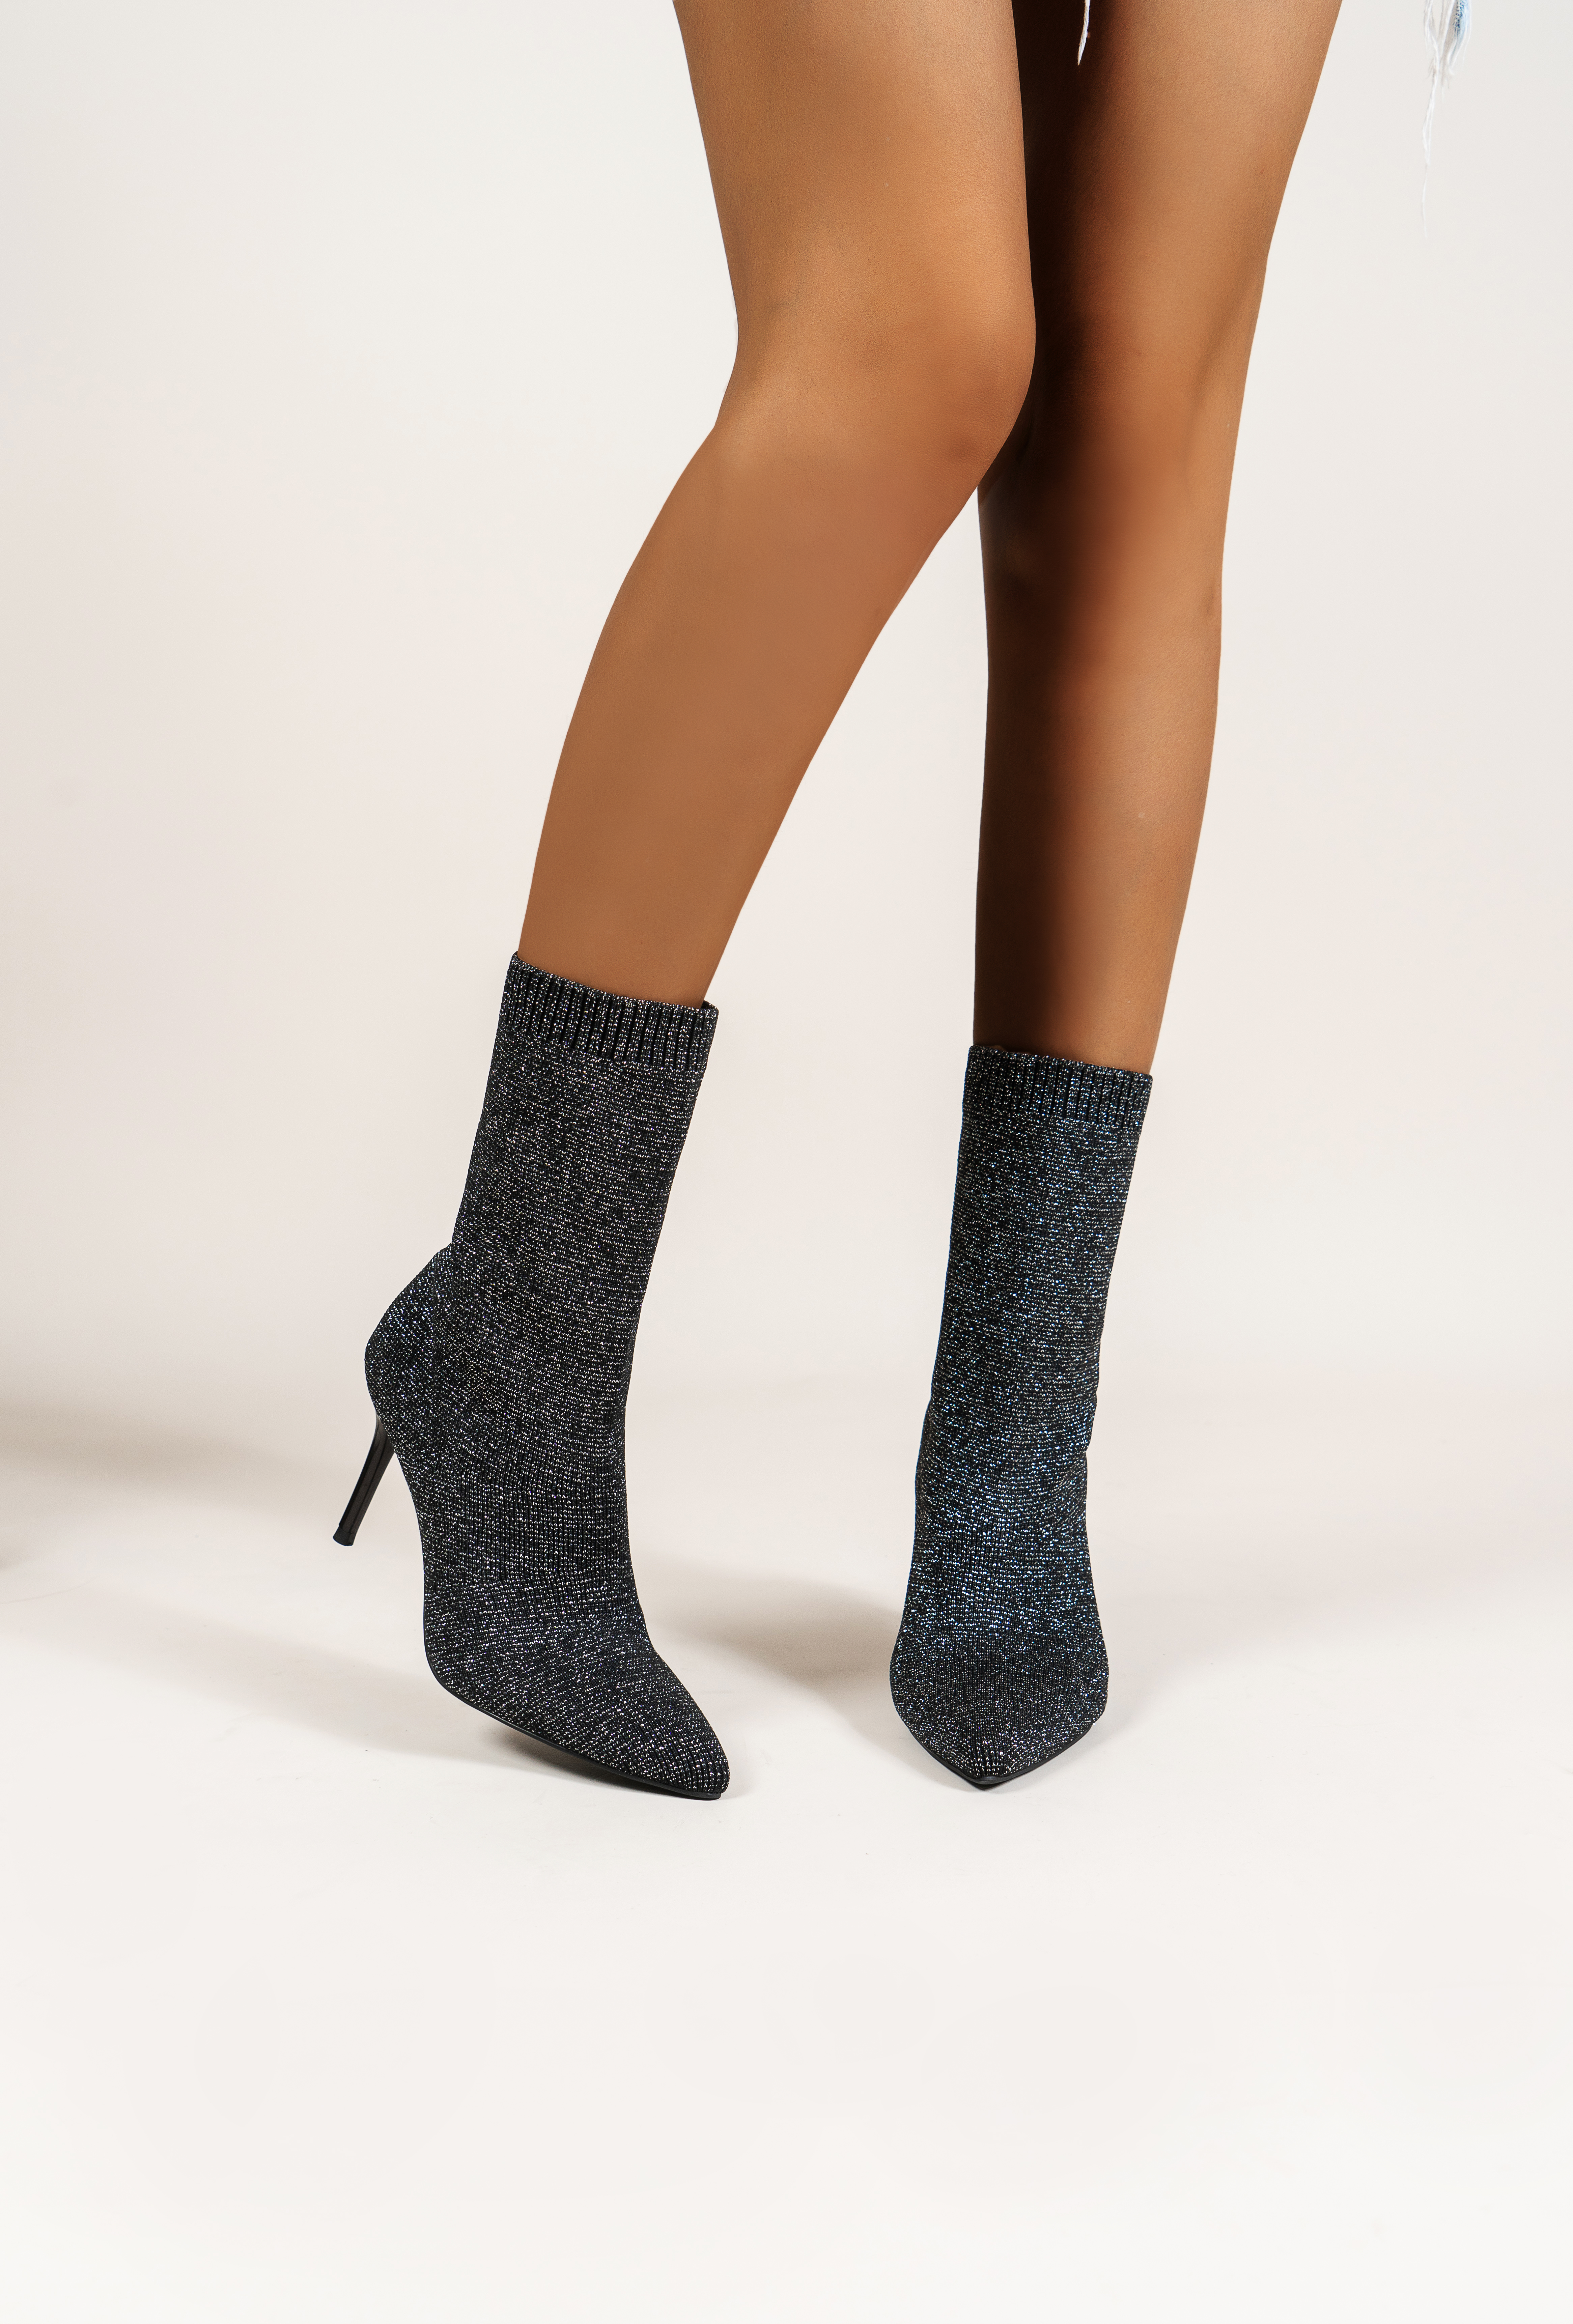 pointed toe woven stretch fabric Stiletto short boots nihaostyles clothing wholesale NSYUS81340